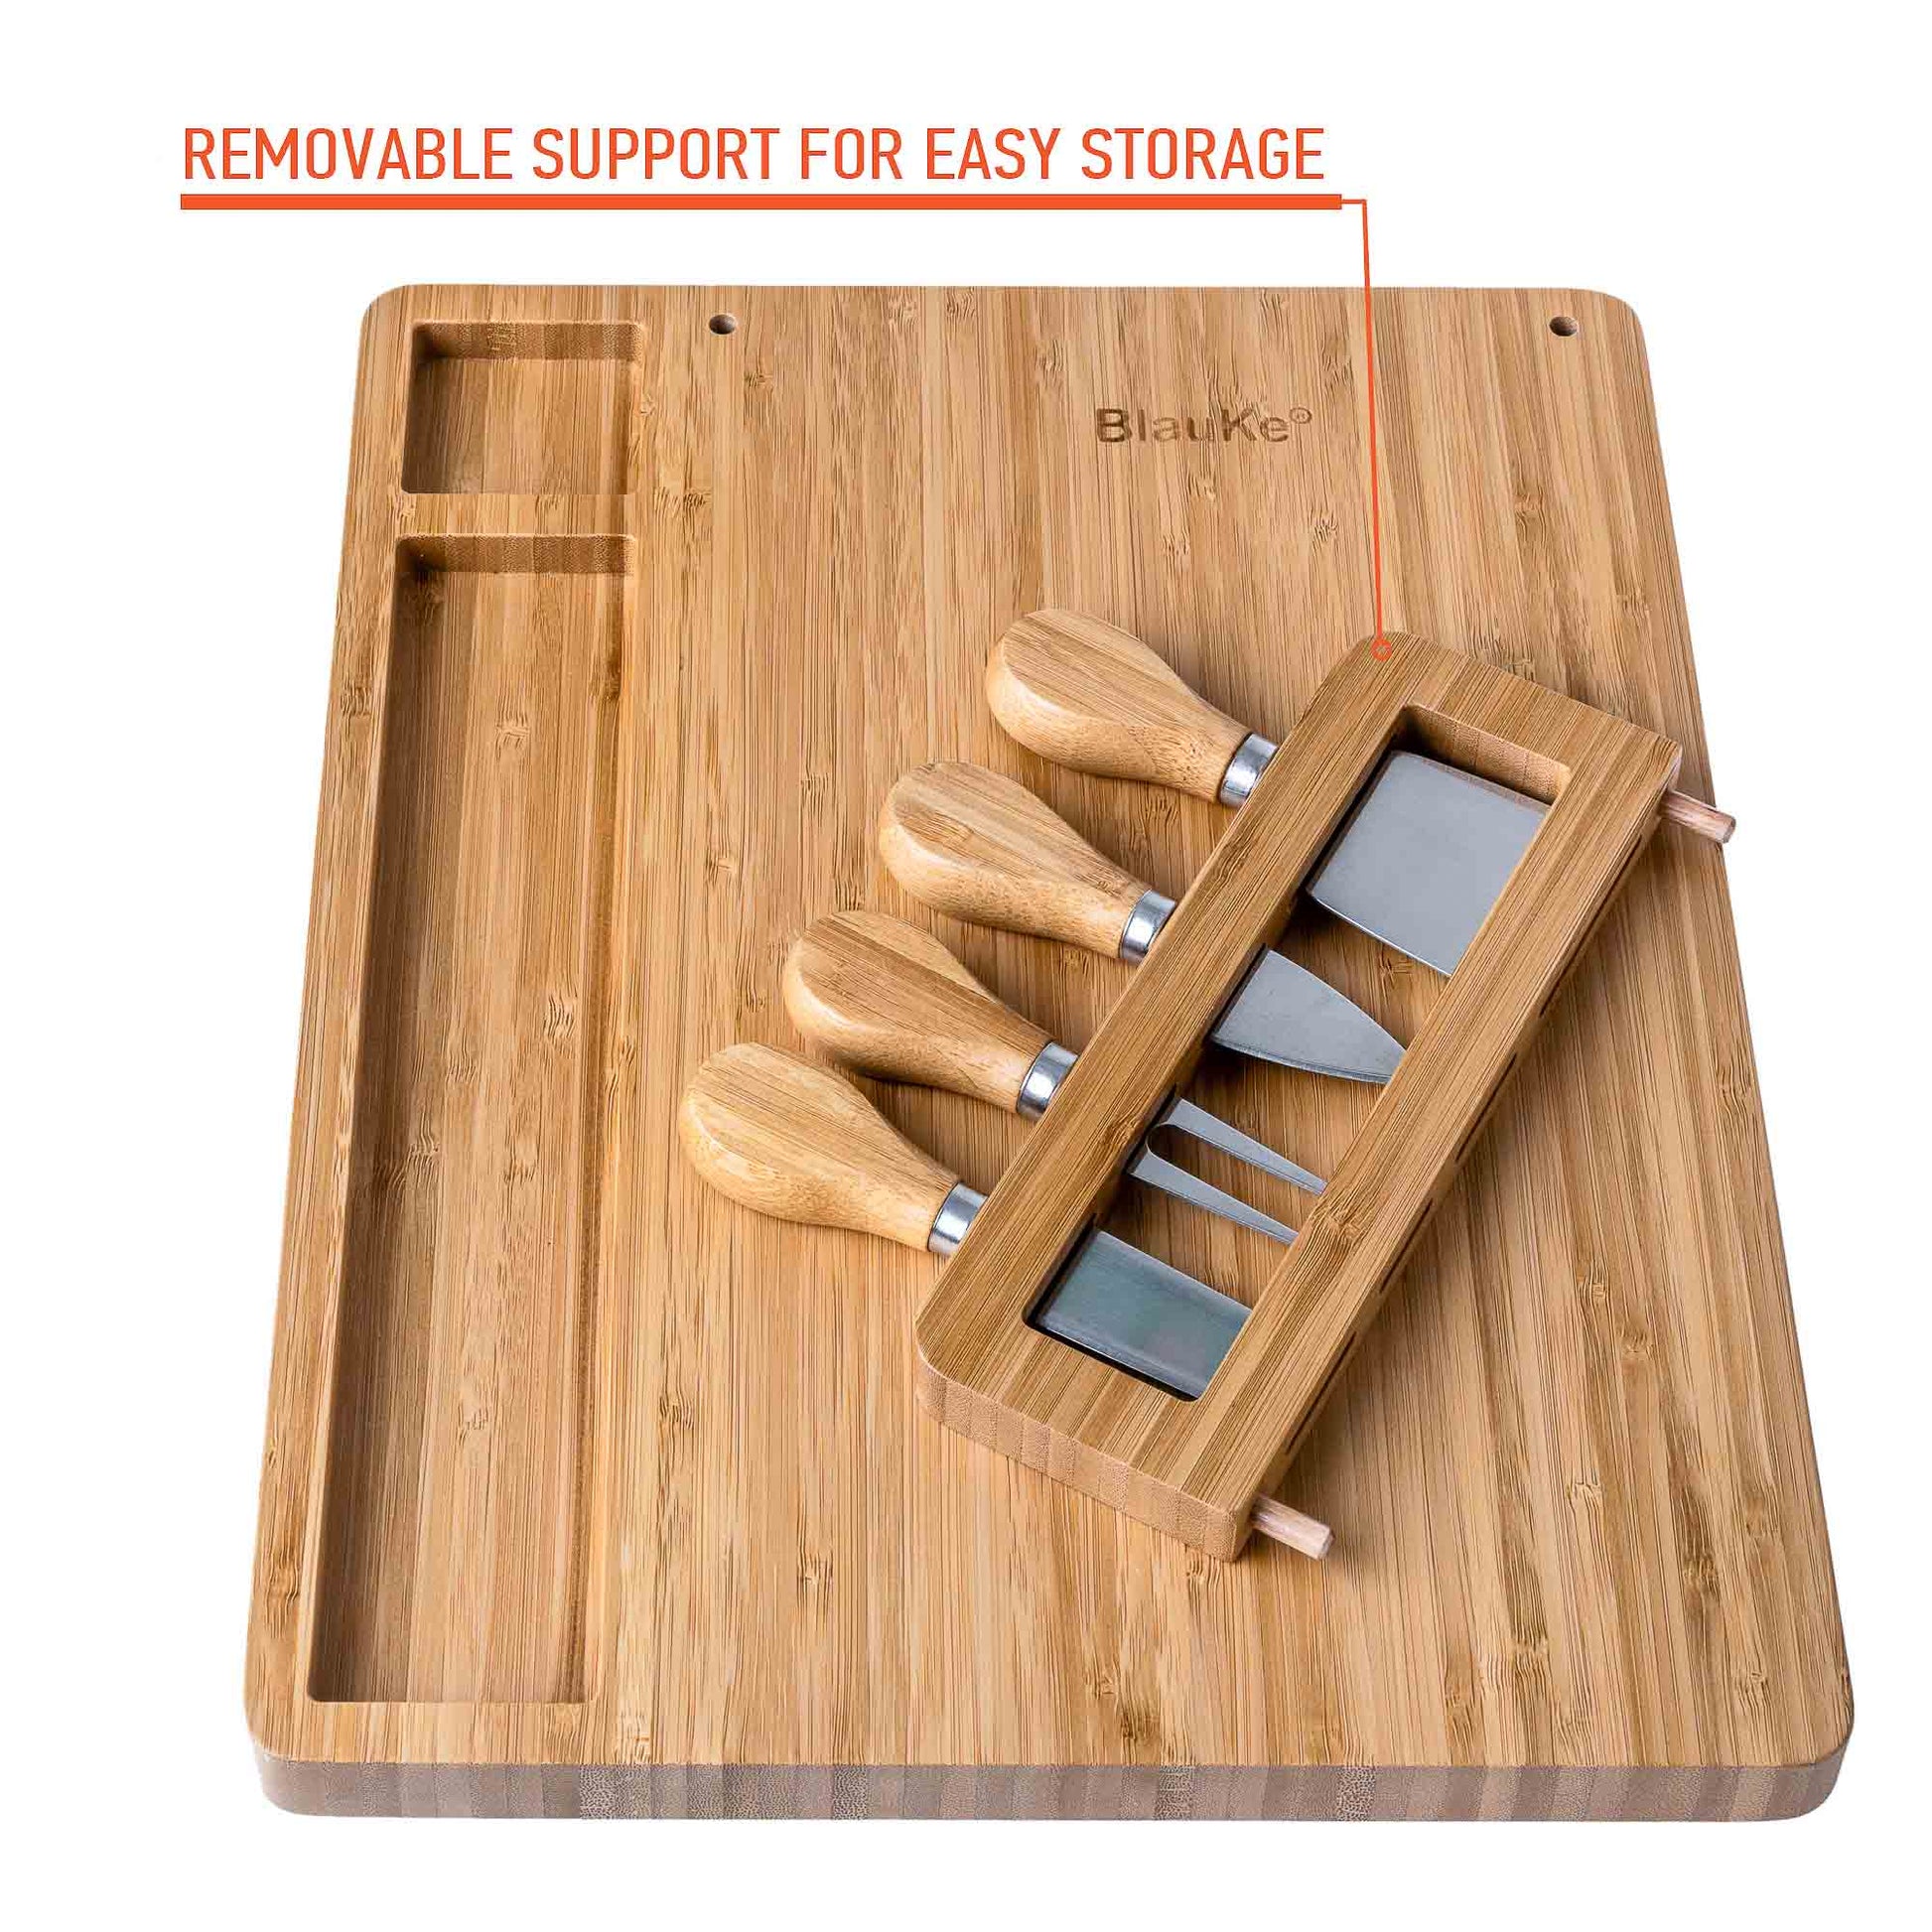 Bamboo Cheese Board and Knife Set - 14x11 inch Charcuterie Board with 4 Cheese Knives - Wood Serving Tray-11